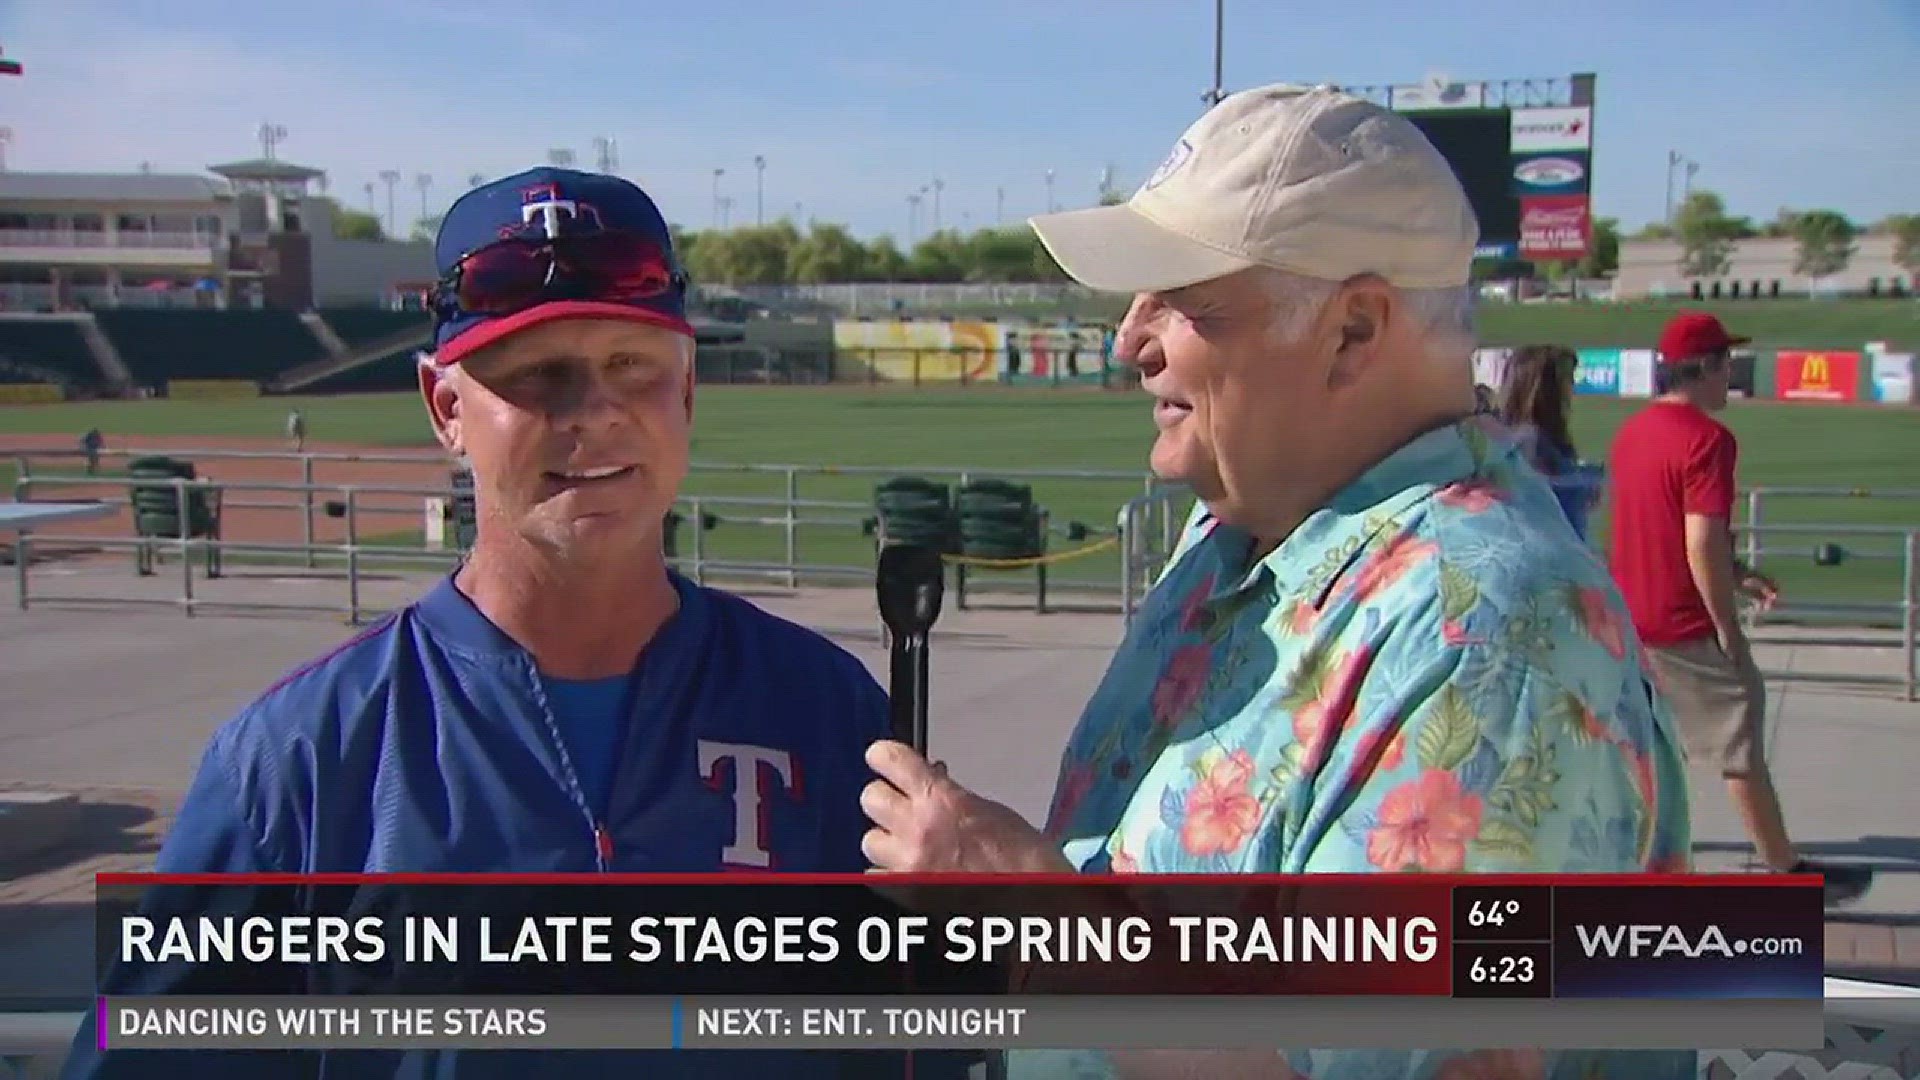 Highlights from the Rangers-Rockies game, and Texas bench coach Steve Buechele talks about pre-season activities with Dale Hansen.